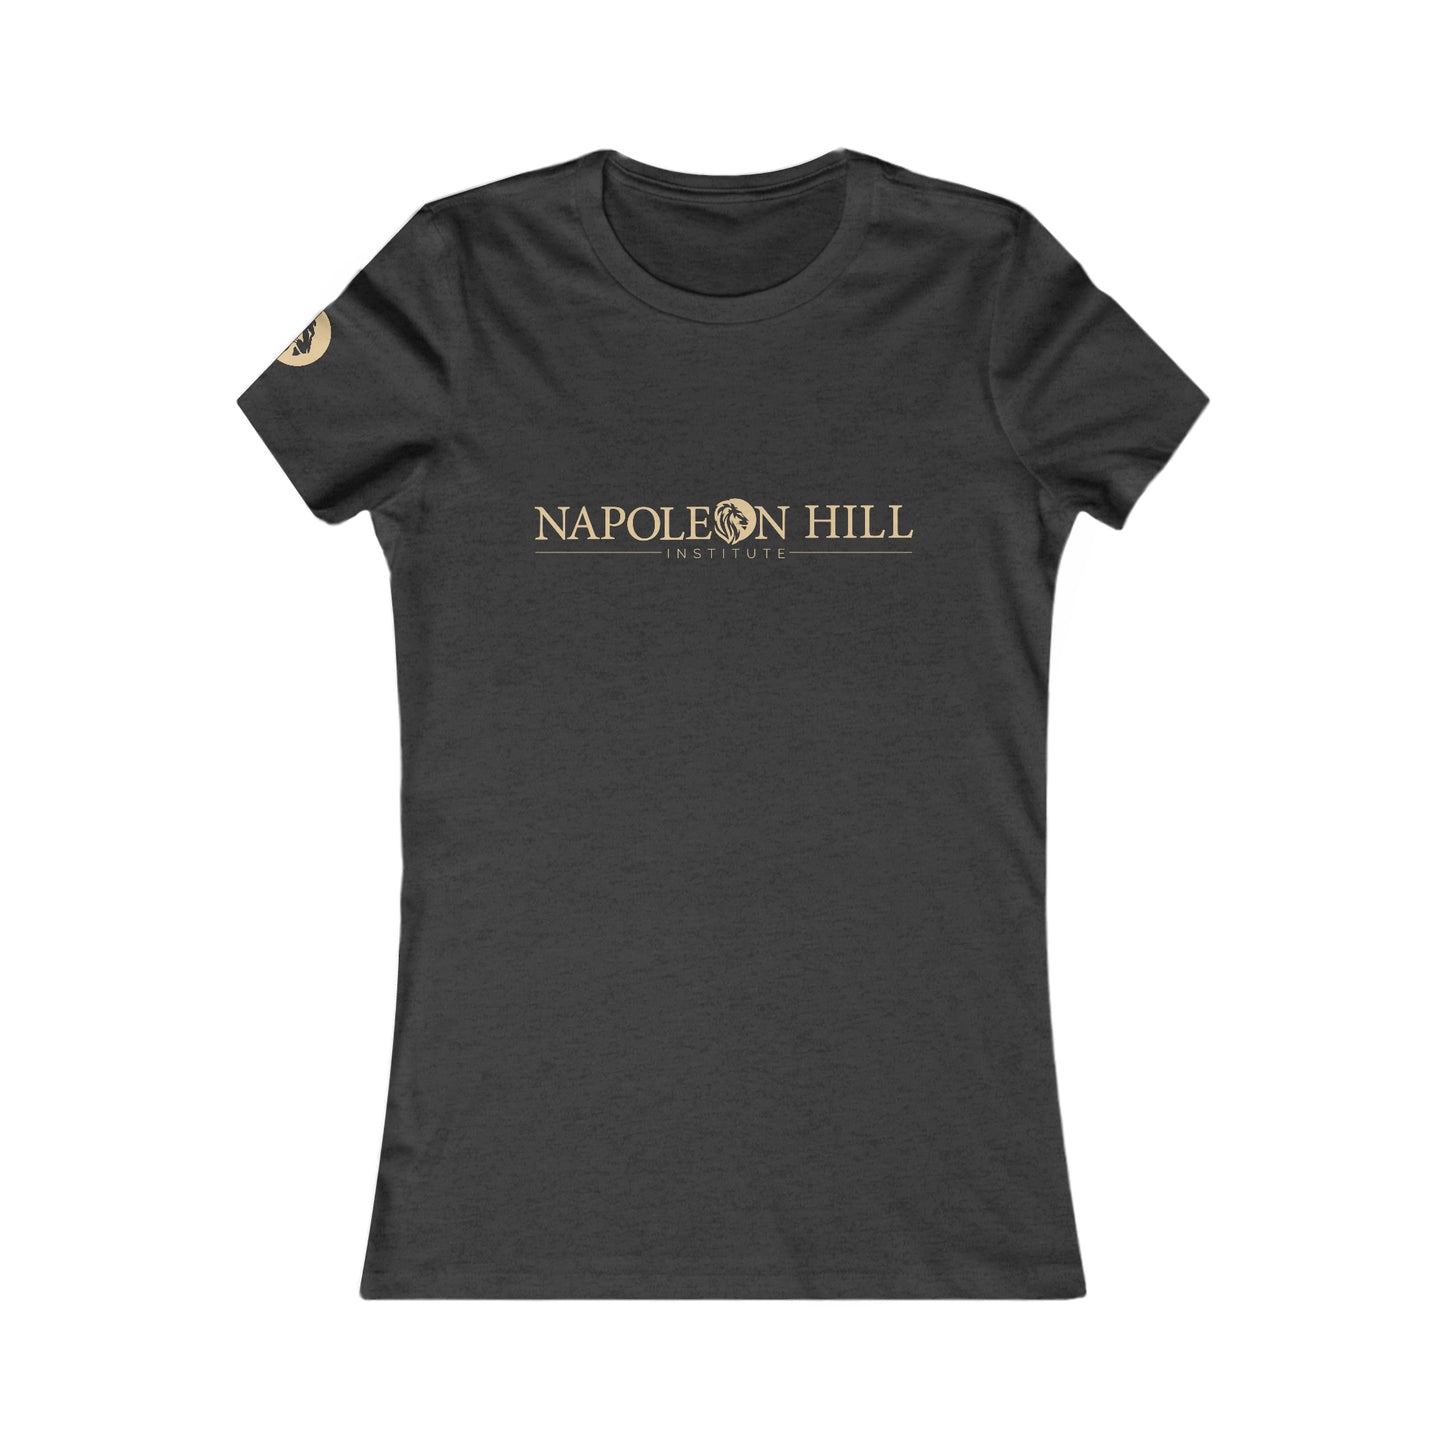 Napoleon Hill Institute T-shirt for Women (Europe shipping)